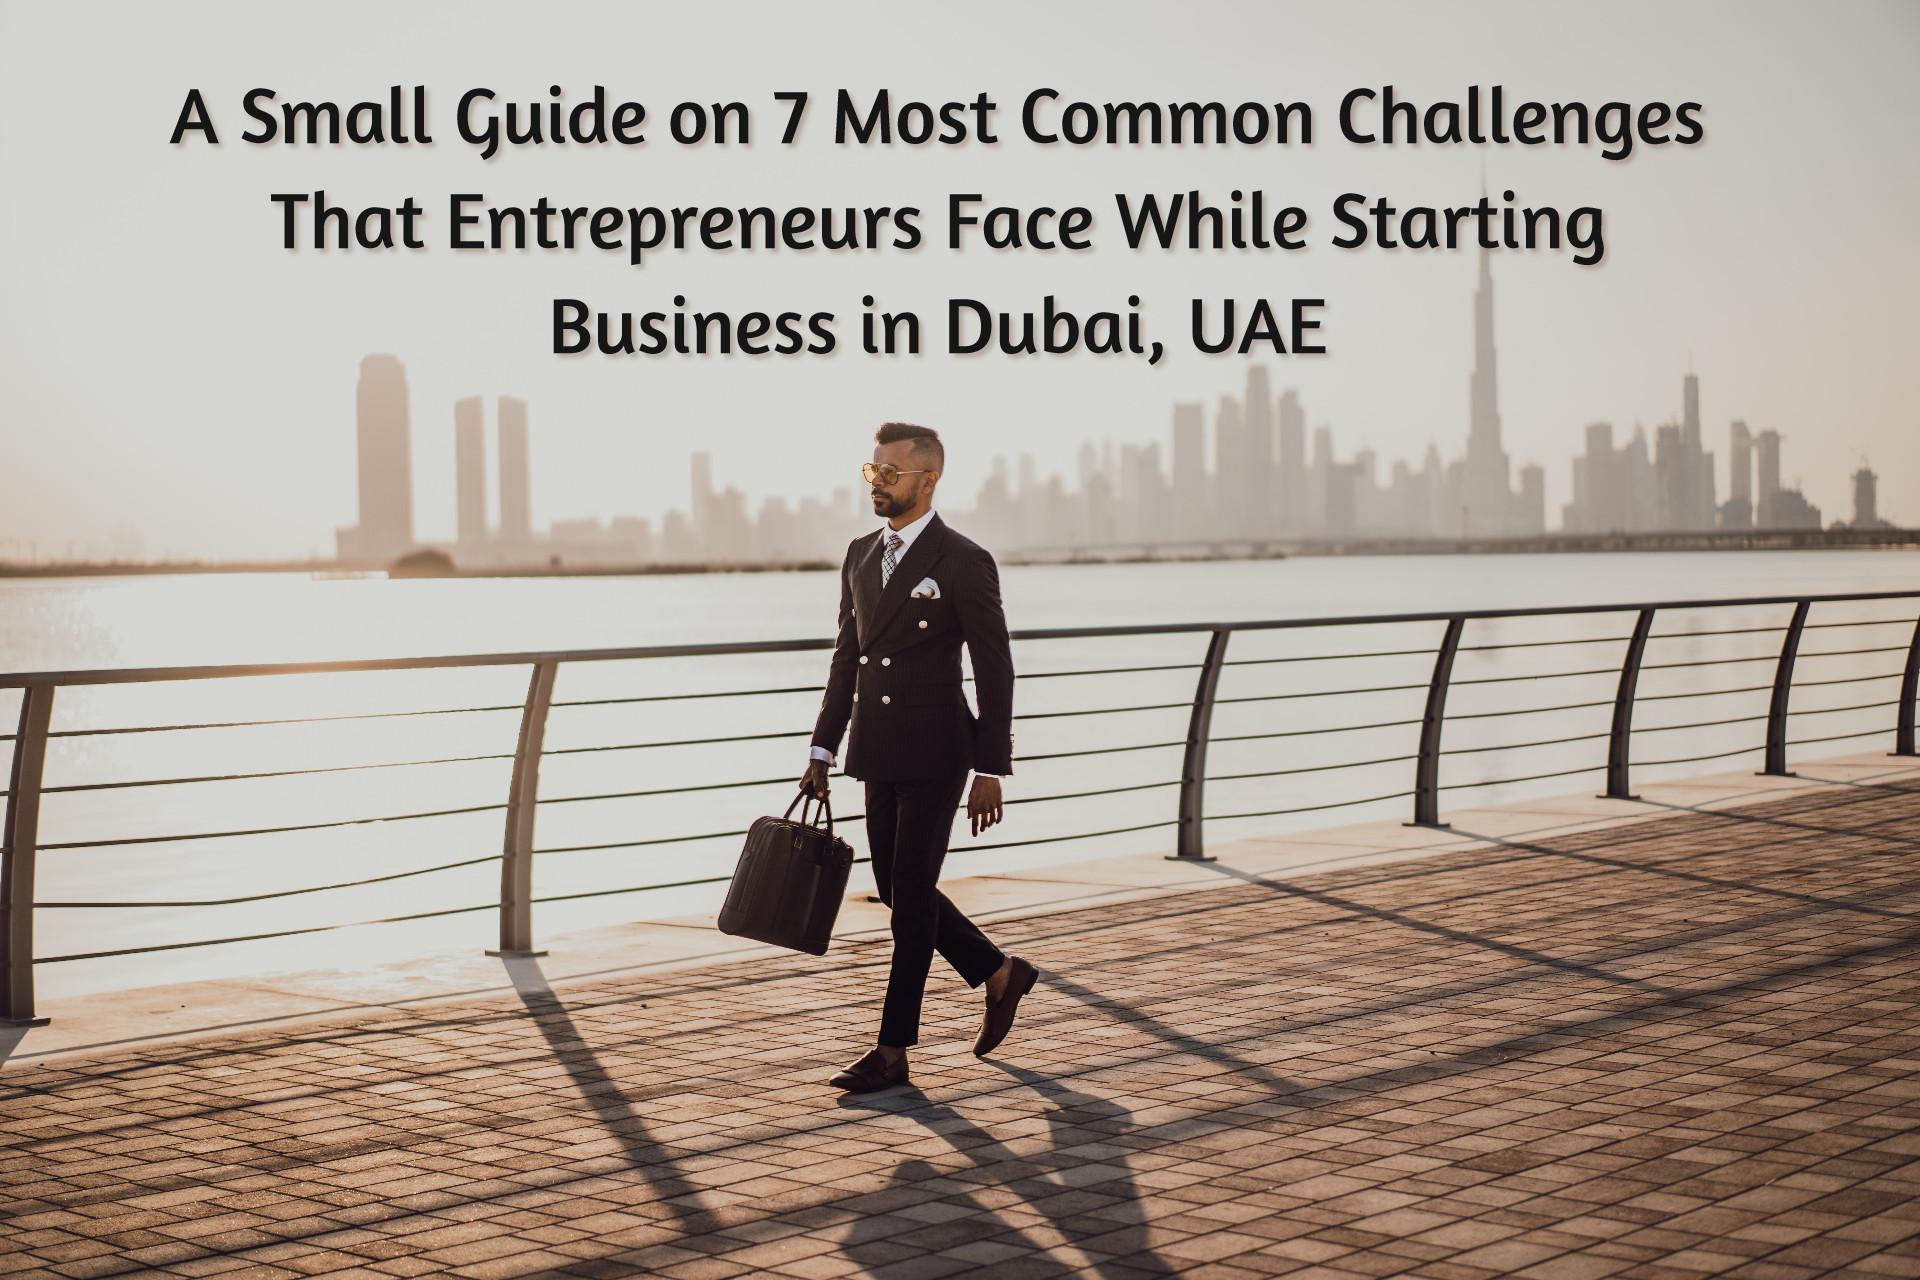 Challenges entrepreneurs face in Dubai UAE when starting a business